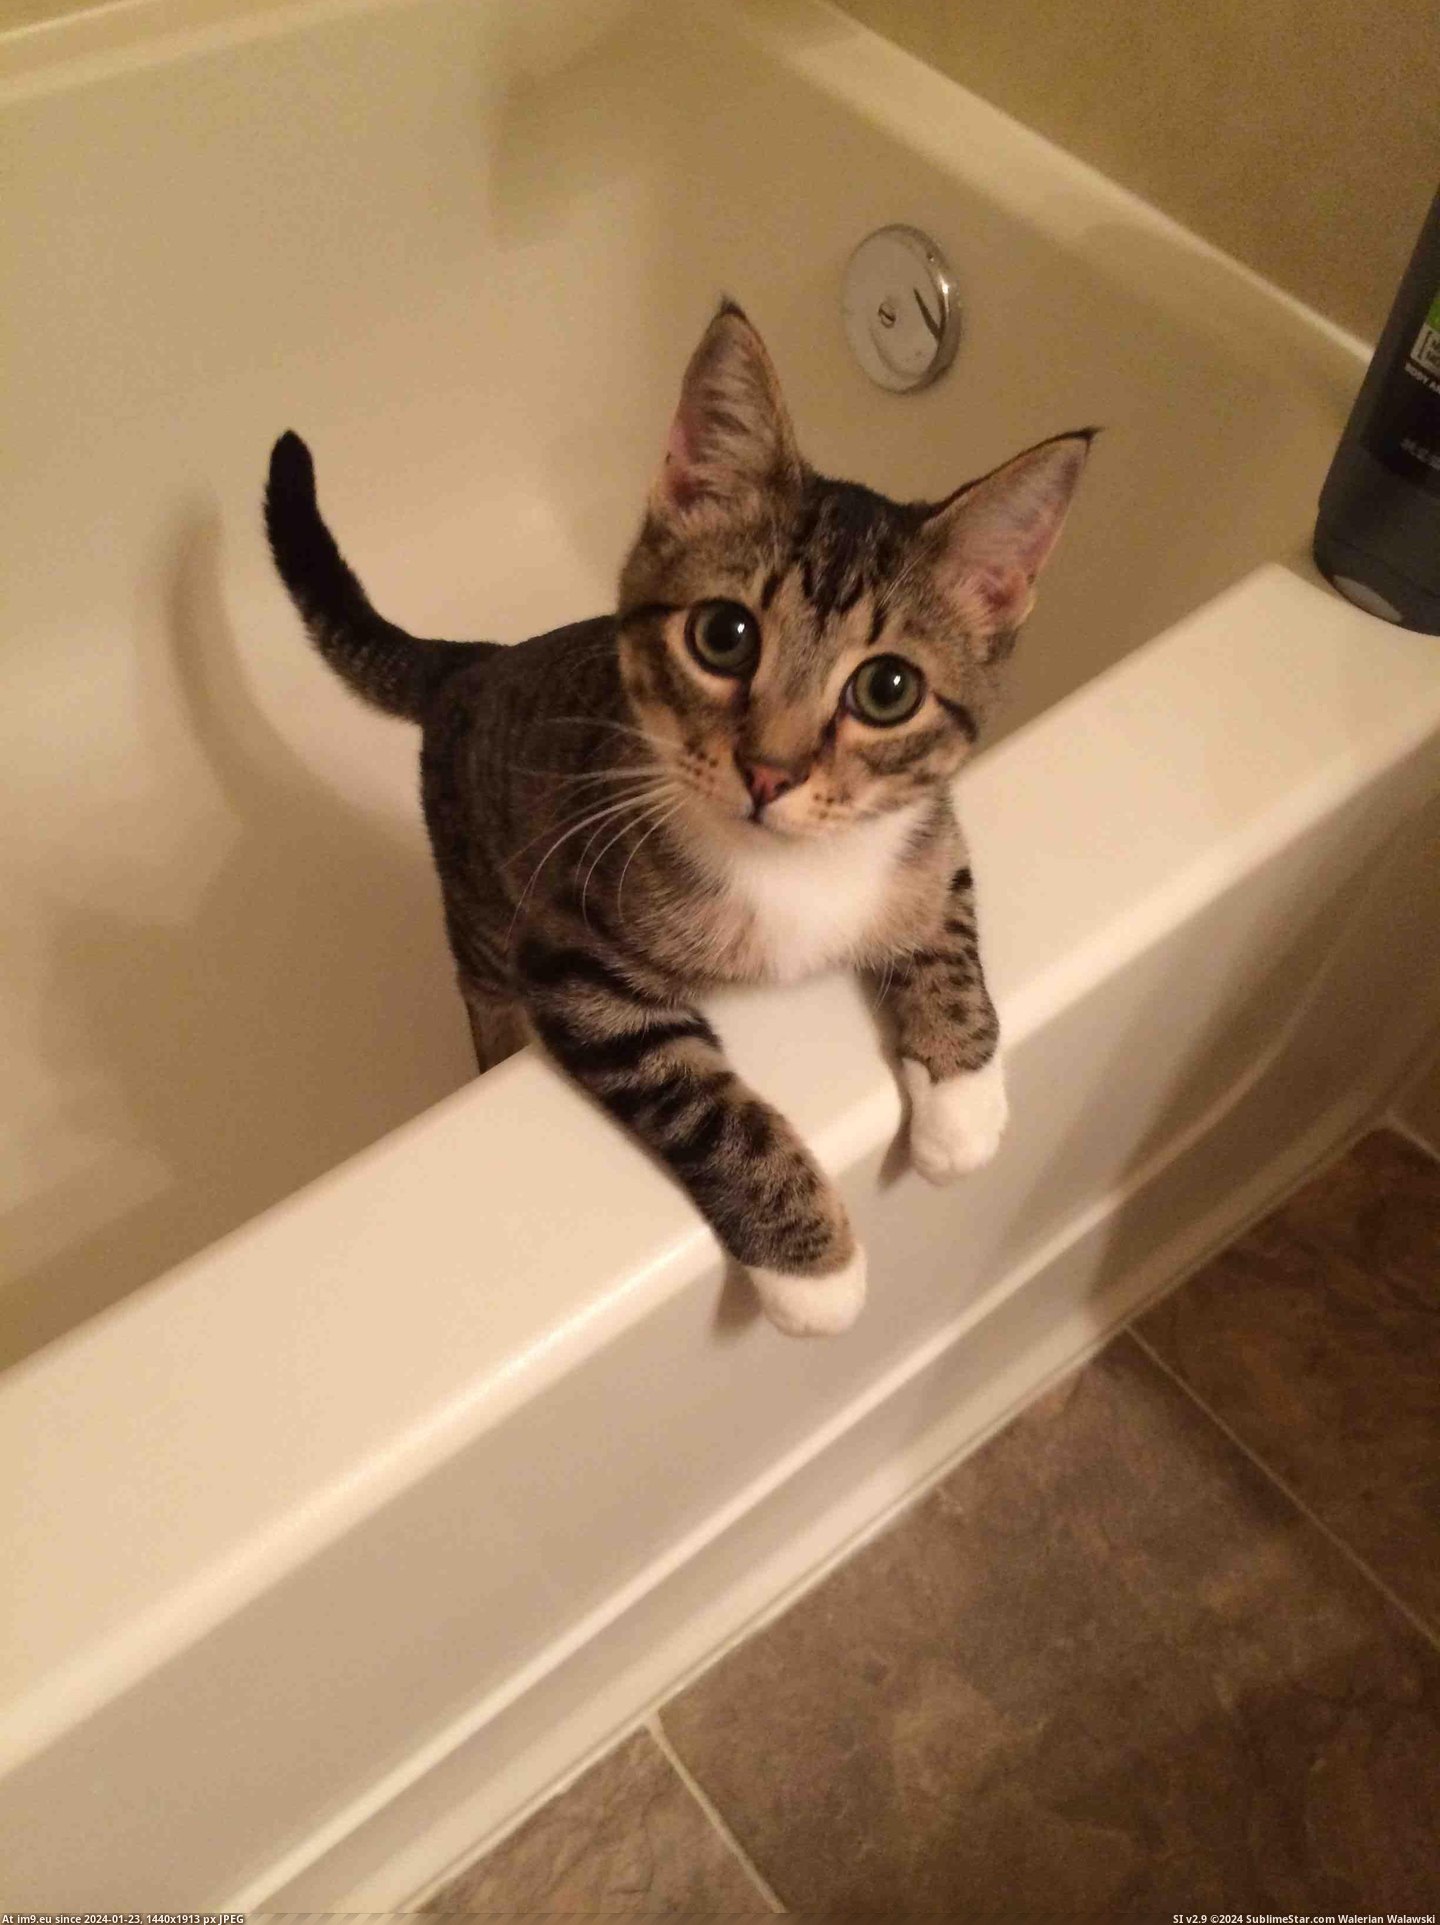 #Shower #Meet #Lou #Tub #Jumps [Aww] He always jumps into the tub after a shower. Reddit, meet Lou. Pic. (Image of album My r/AWW favs))